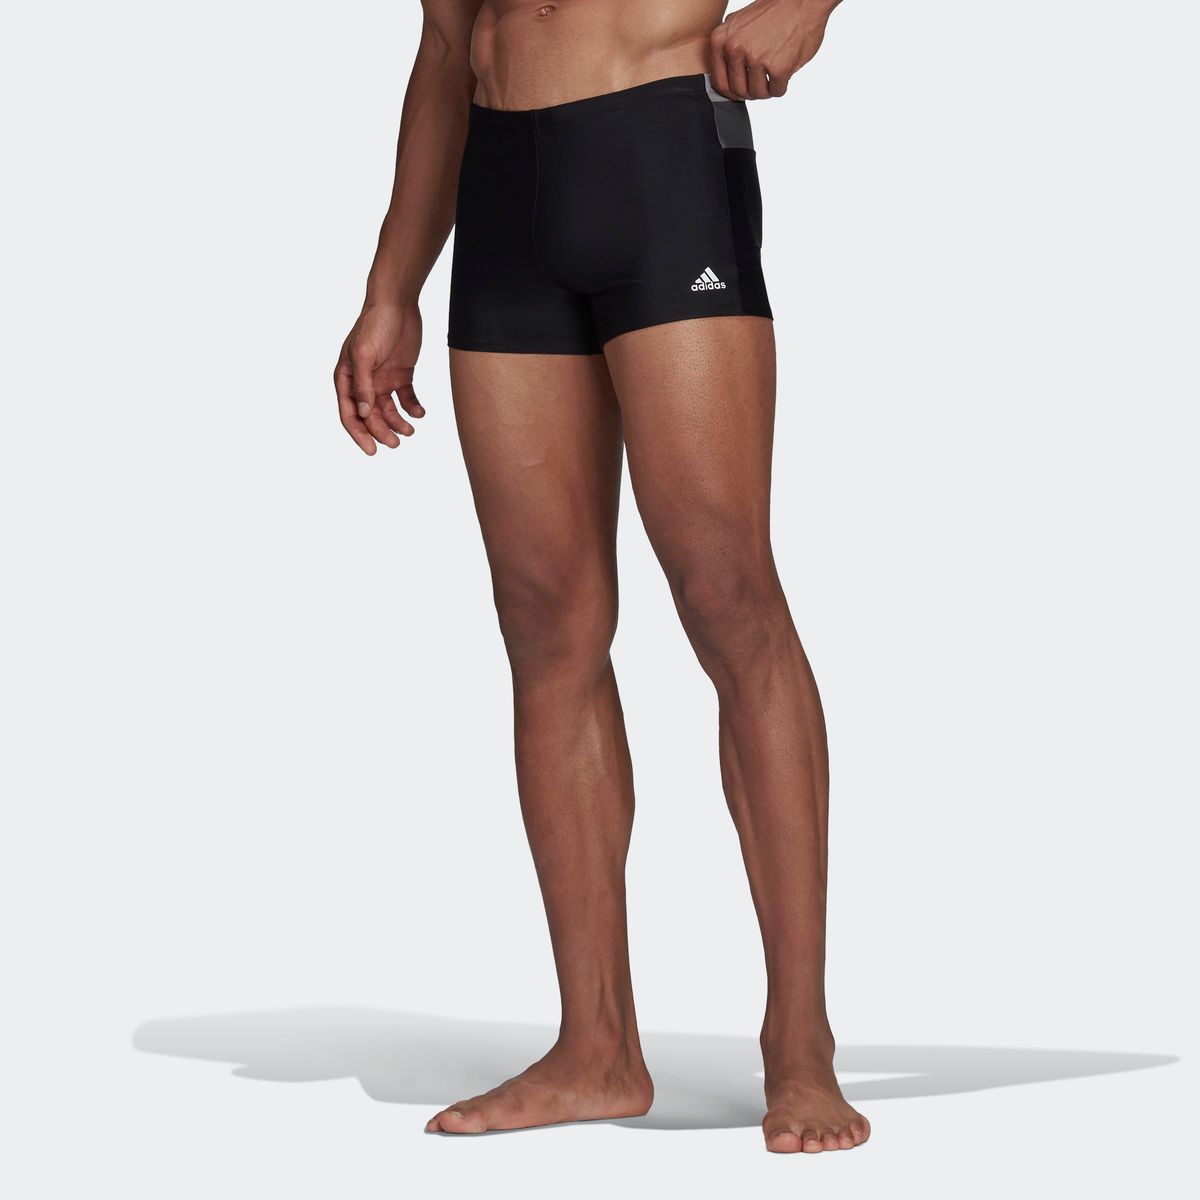 Visiter la boutique adidasadidas Electric Shooter Maillots Homme 